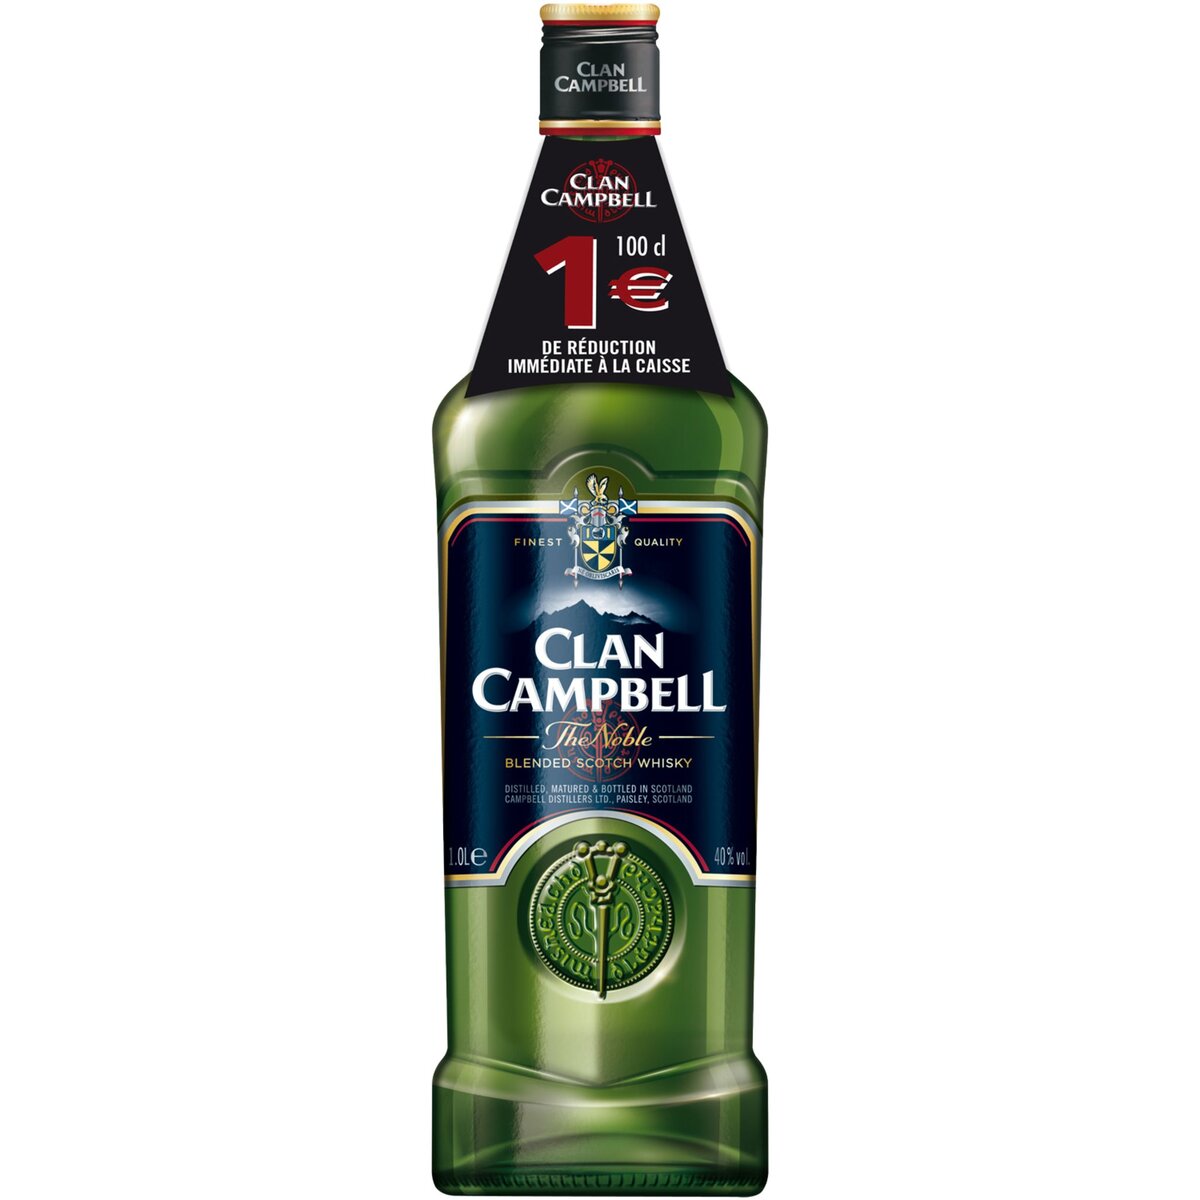 CLAN CAMPBELL Clan Campbell whisky 40° -1l